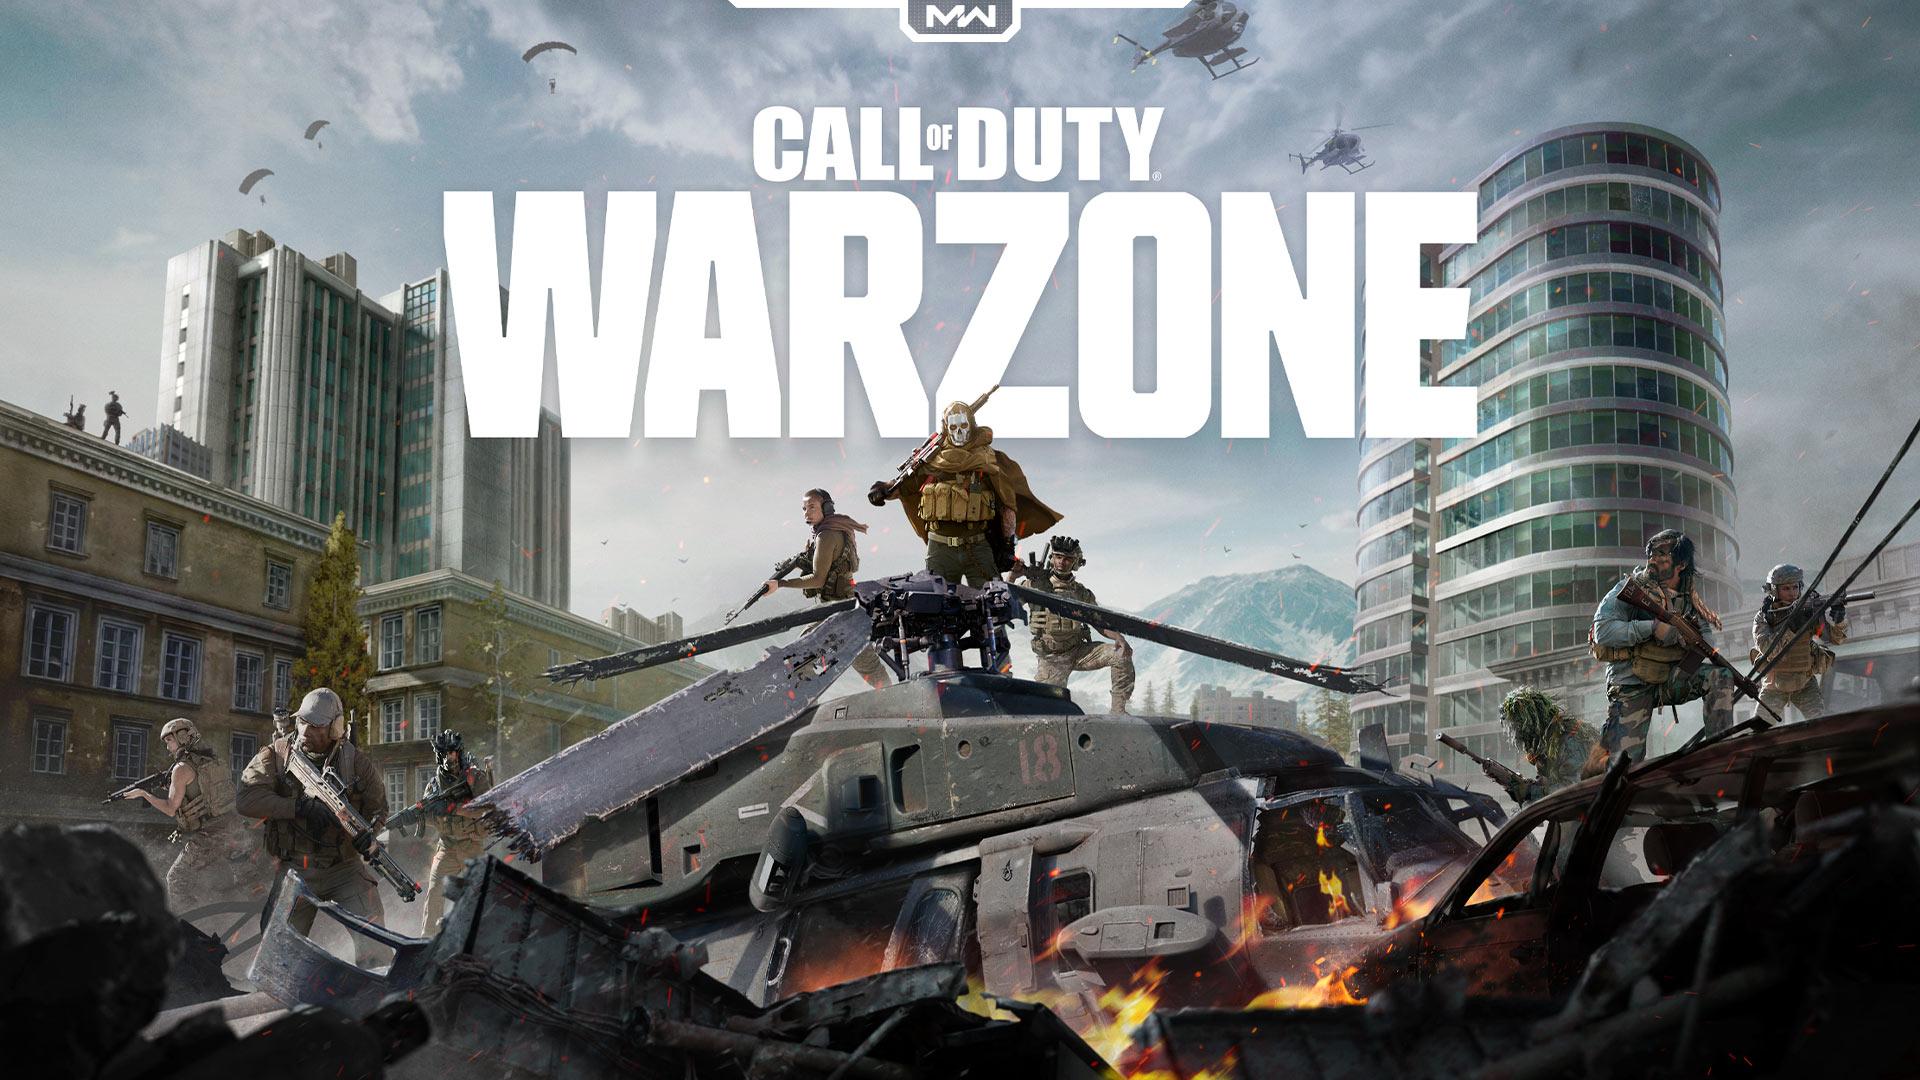 Activision shuts down console hack for Call of Duty Warzone